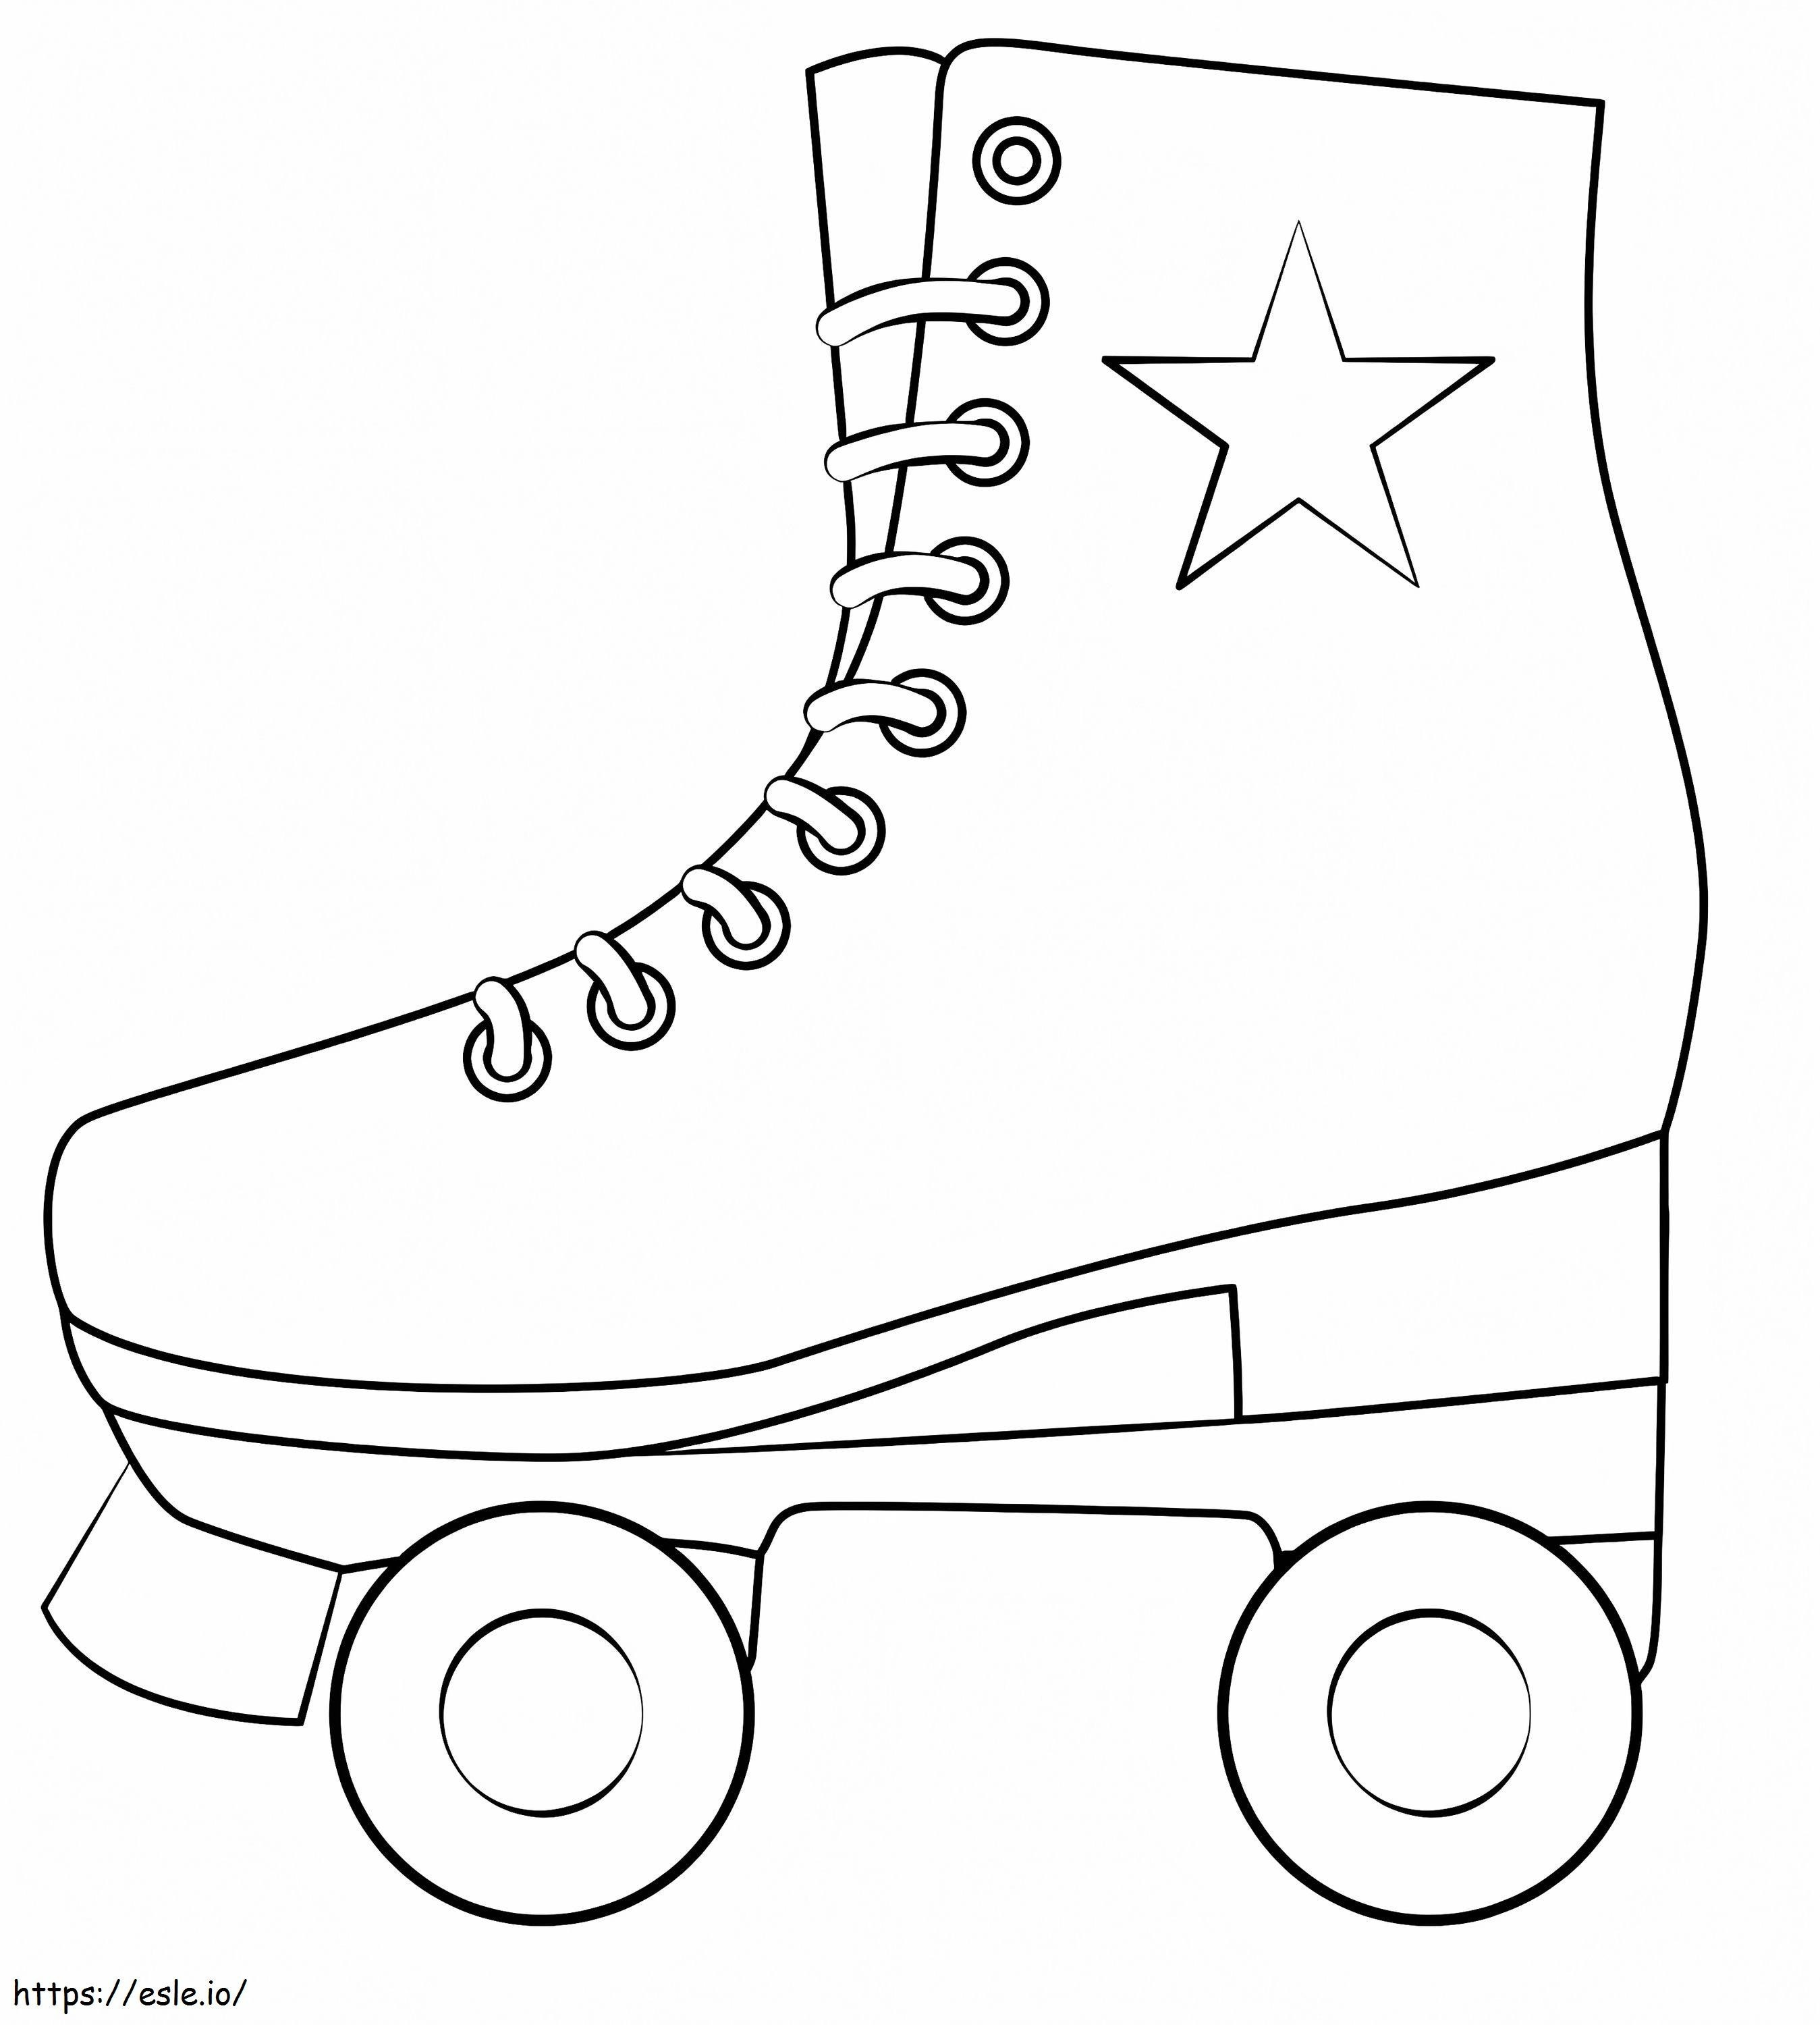 Printable Roller Skate coloring page